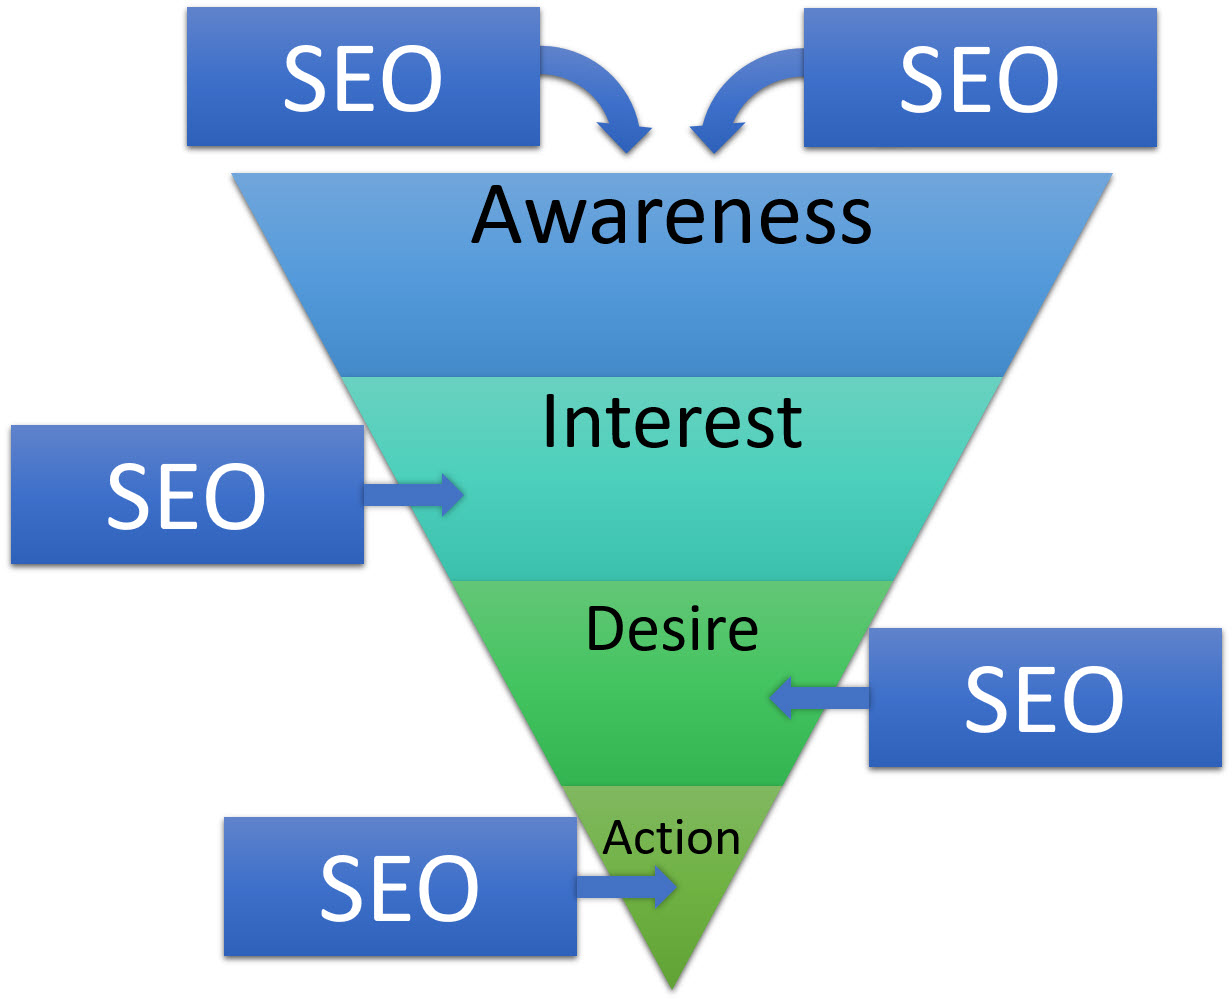 Search engine optimization greatly impacts the traditional AIDA sales funnel — awareness, interest, desire, action.